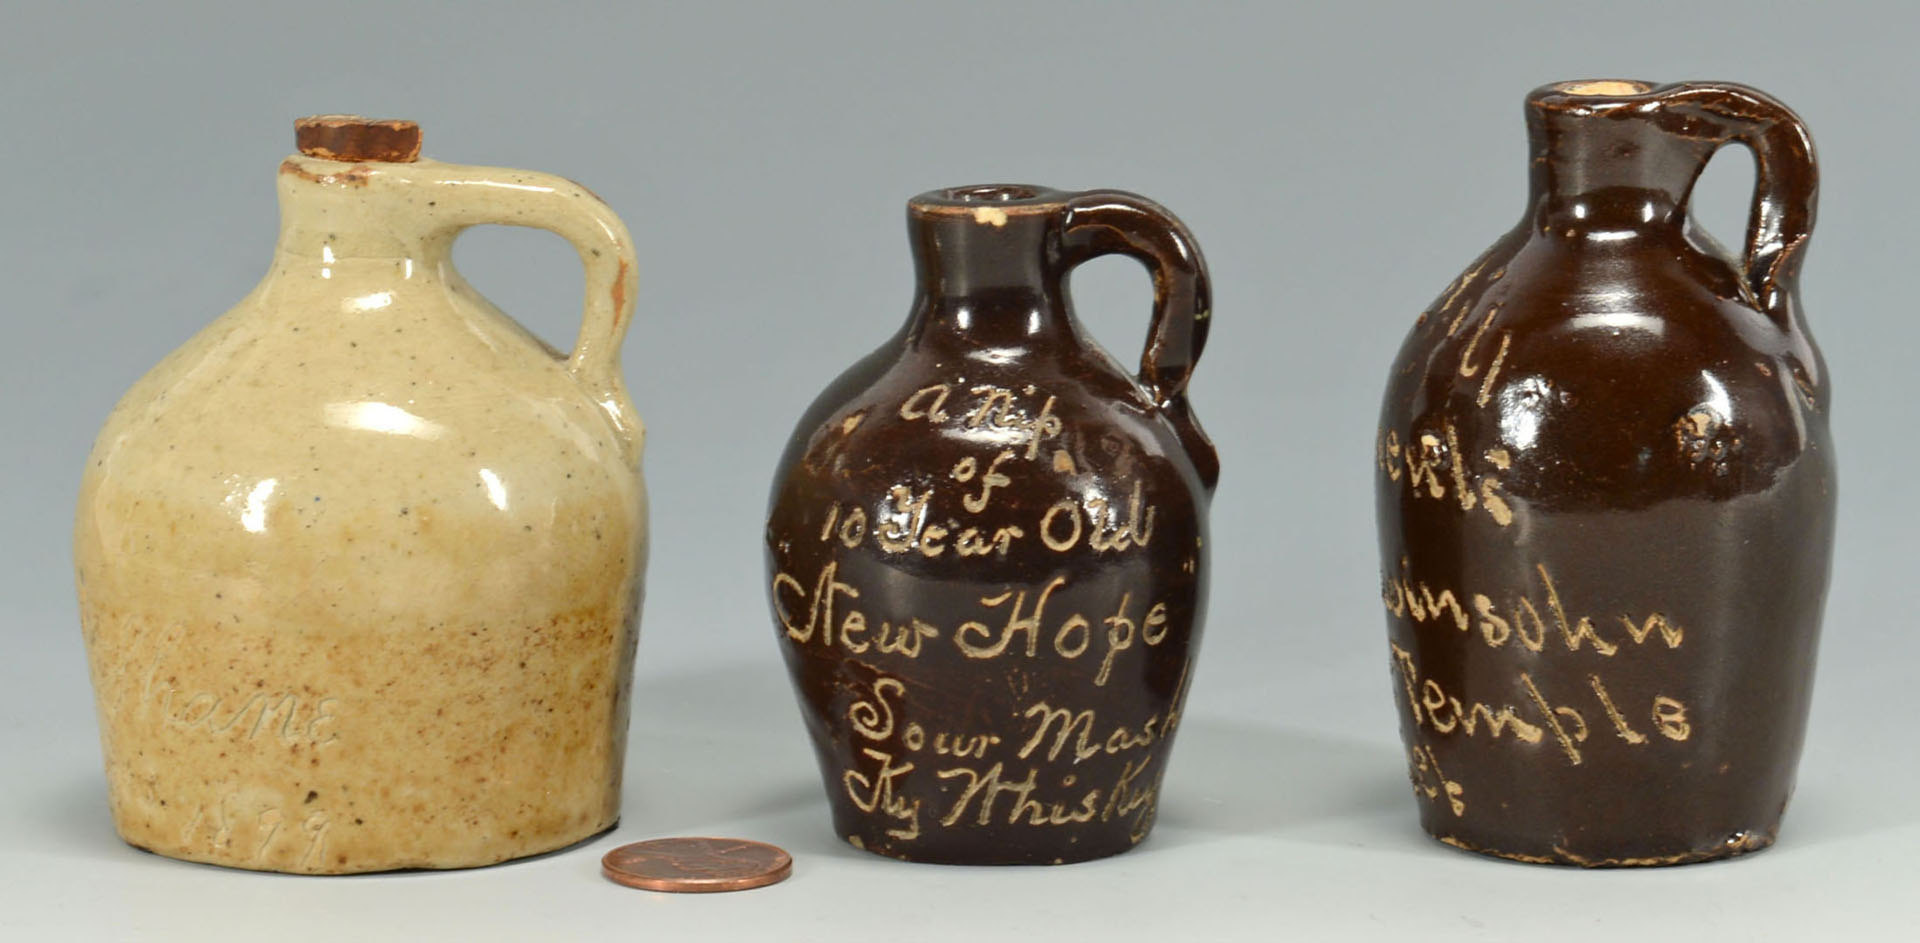 Lot 552: 3 Miniature Jugs, Incised Script, One KY Whiskey